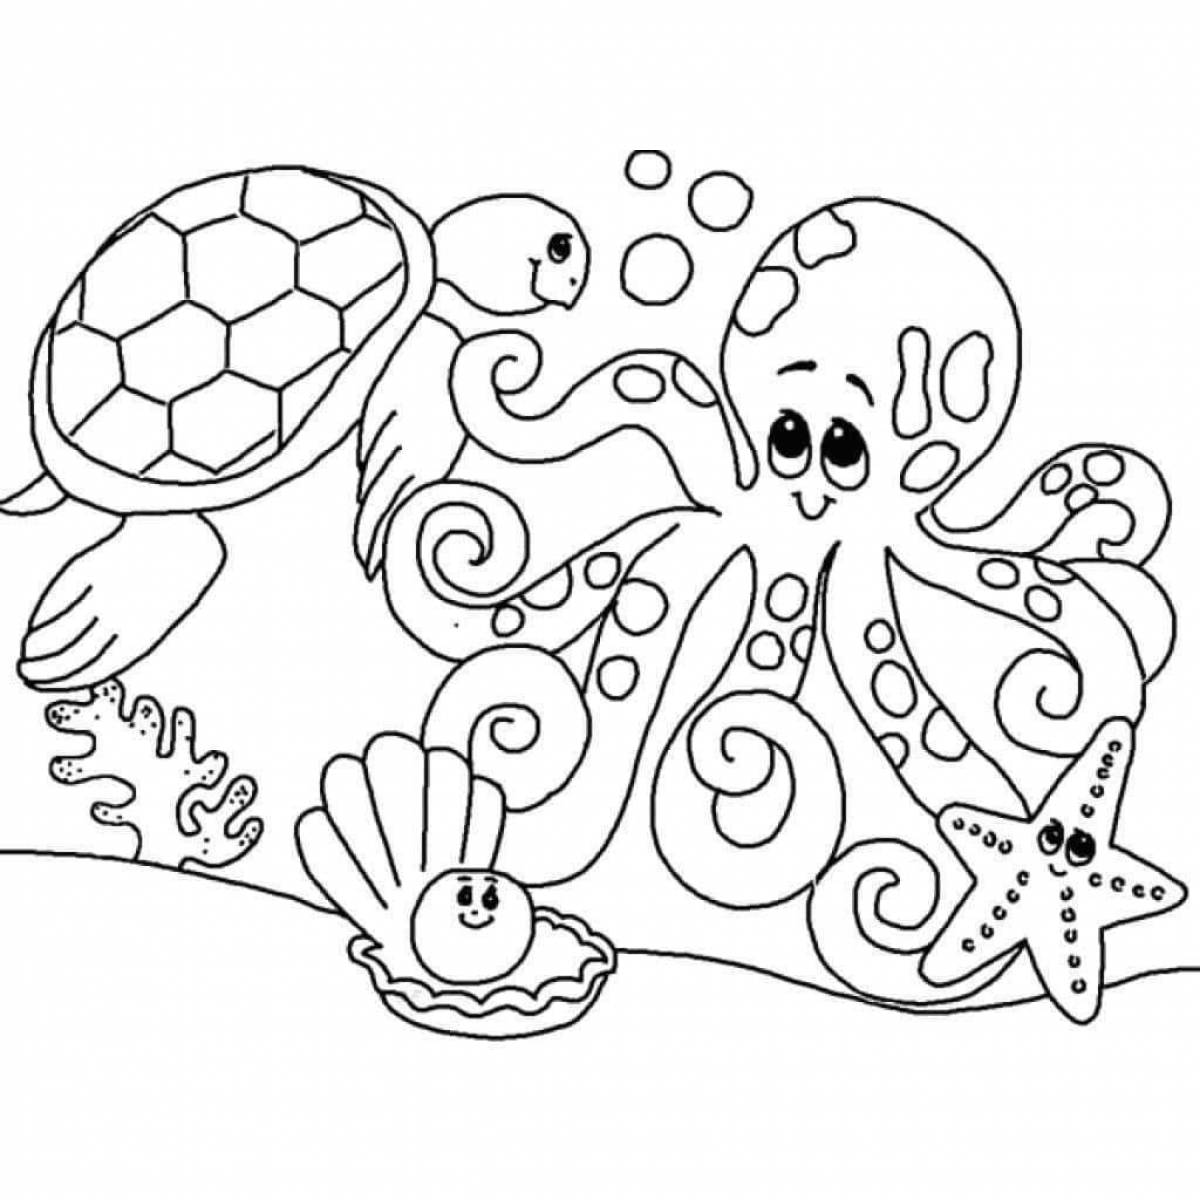 Changeling octopus mysterious coloring book